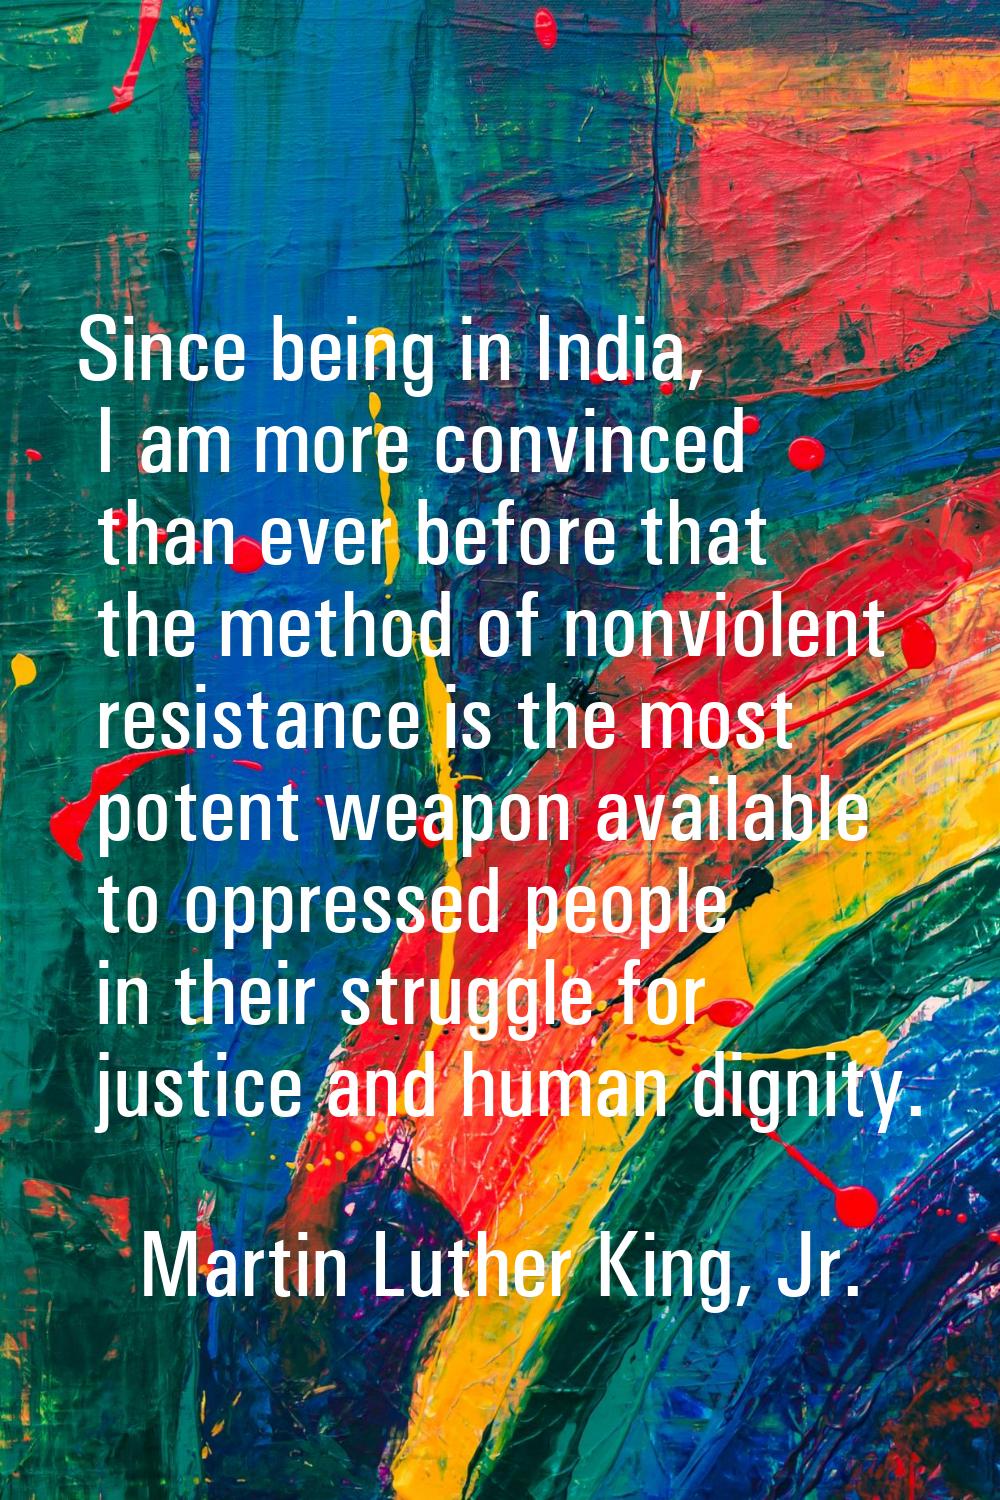 Since being in India, I am more convinced than ever before that the method of nonviolent resistance